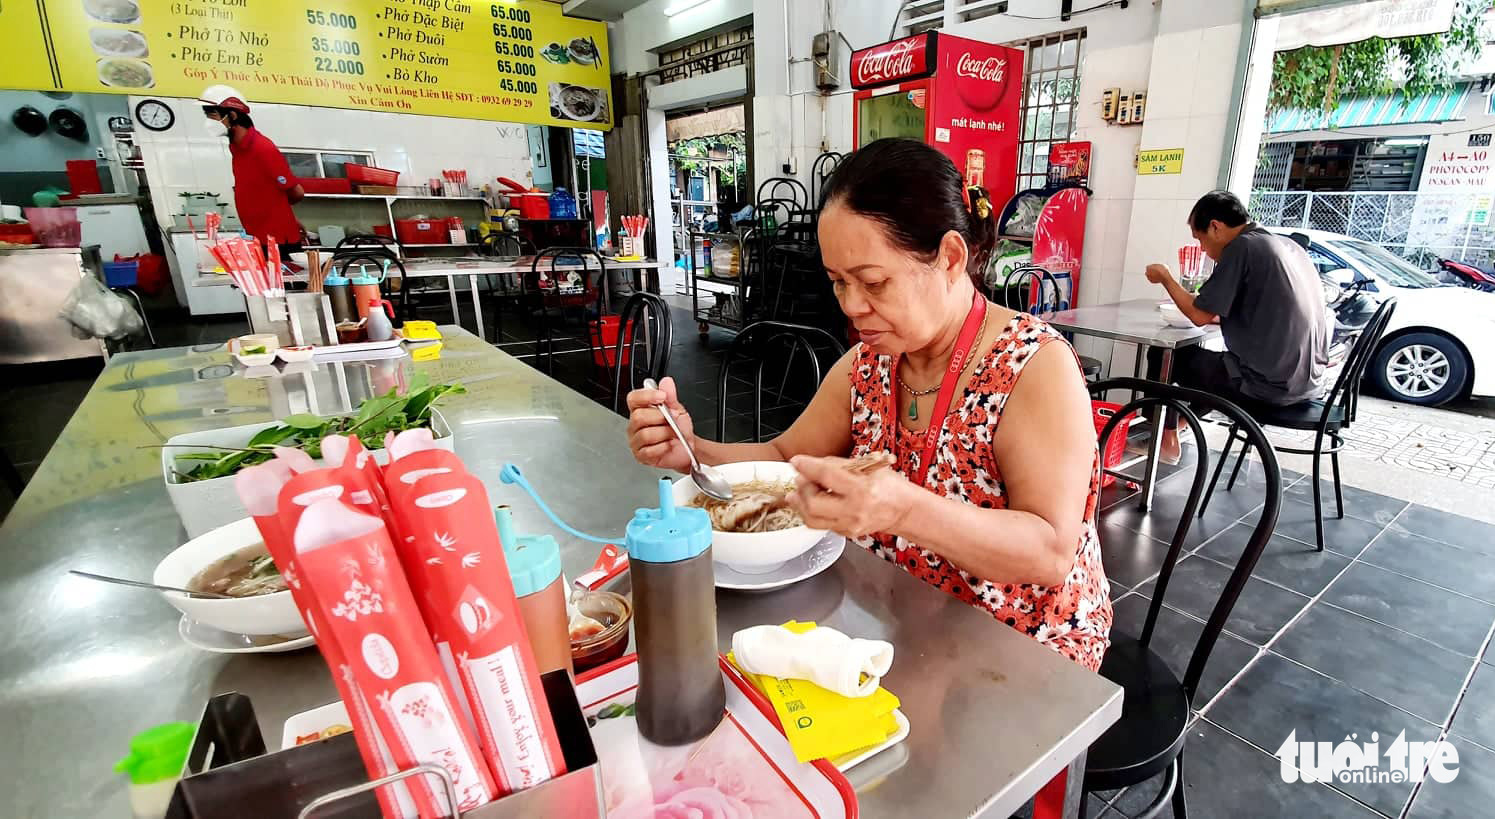 A woman enjoys a bowl of pho in Binh Thanh District, Ho Chi Minh City, October 28, 2021. Photo: Cong Trung / Tuoi Tre